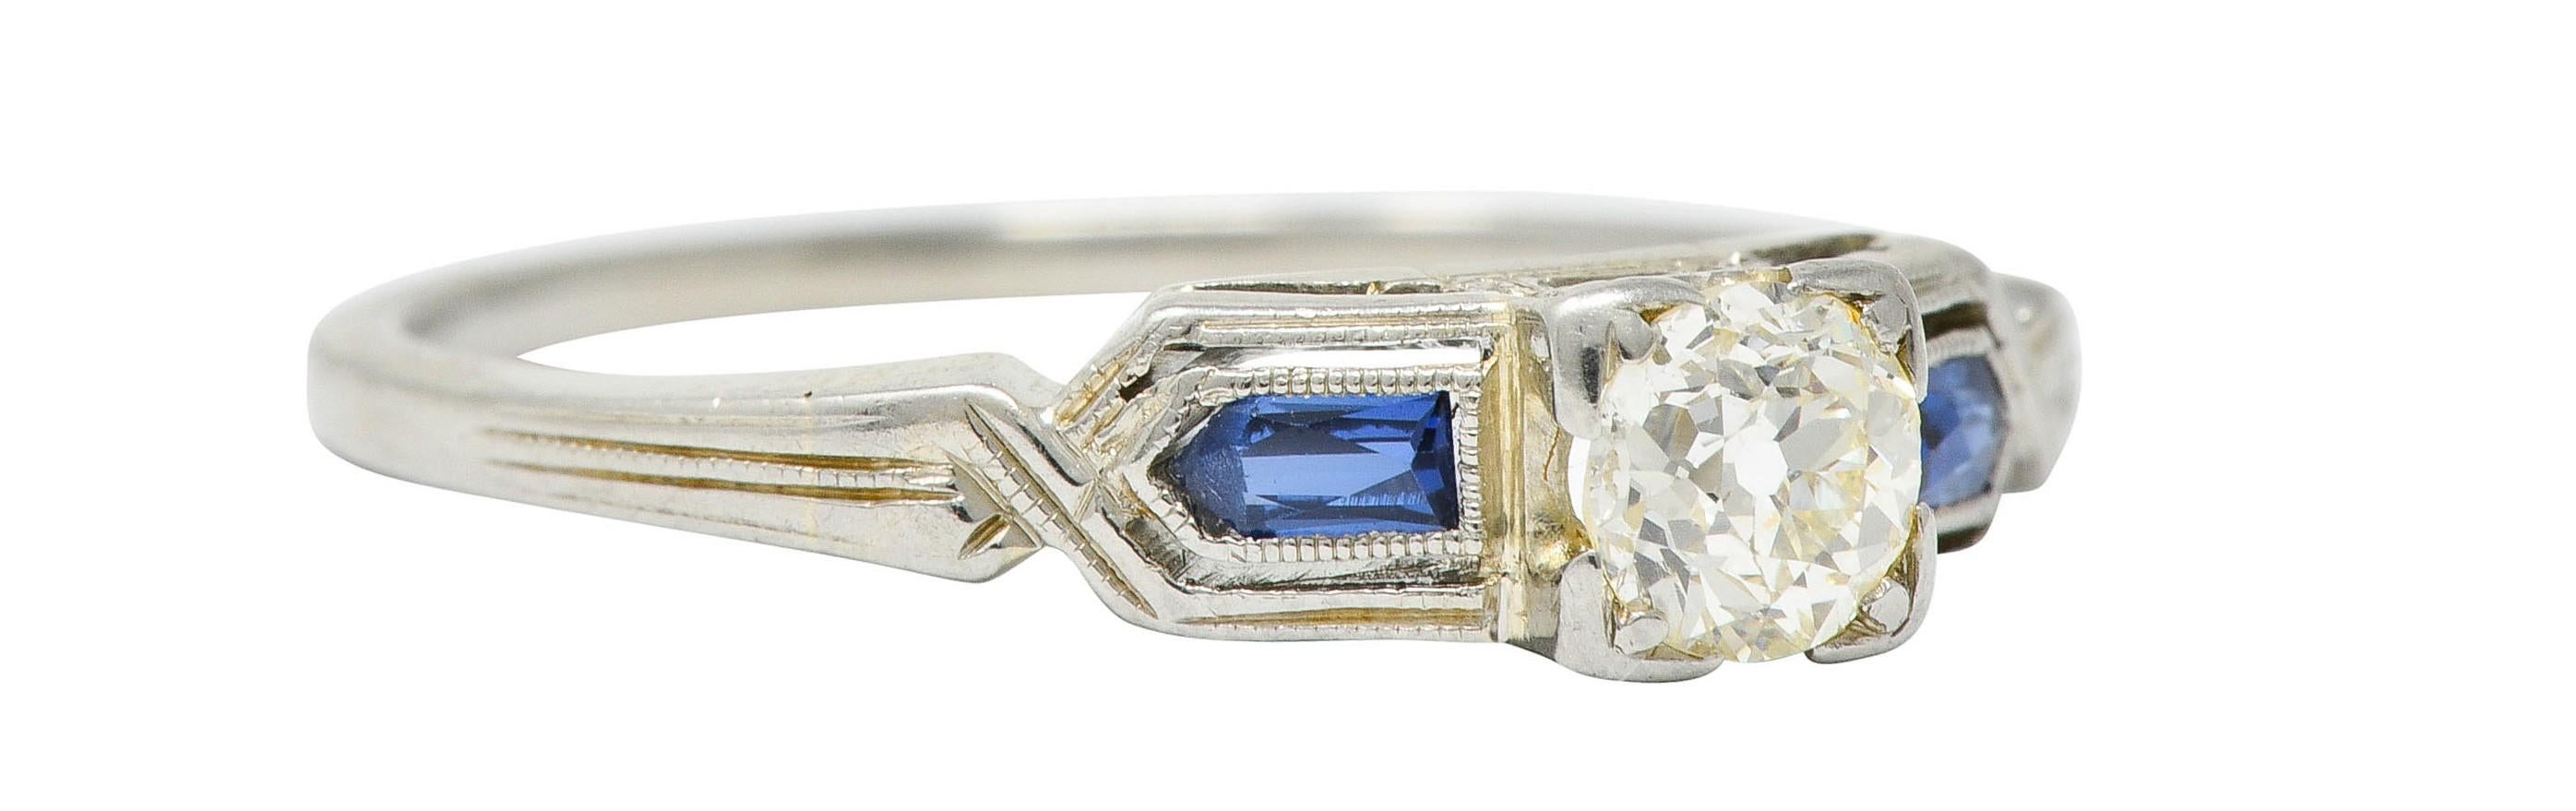 Centering an old European cut diamond weighing approximately 0.27 carat; K/L color and VS clarity

Set in an engraved square form head flanked by slight cathedral shoulders

With bright blue calibrè cut sapphires weighing in total approximately 0.10